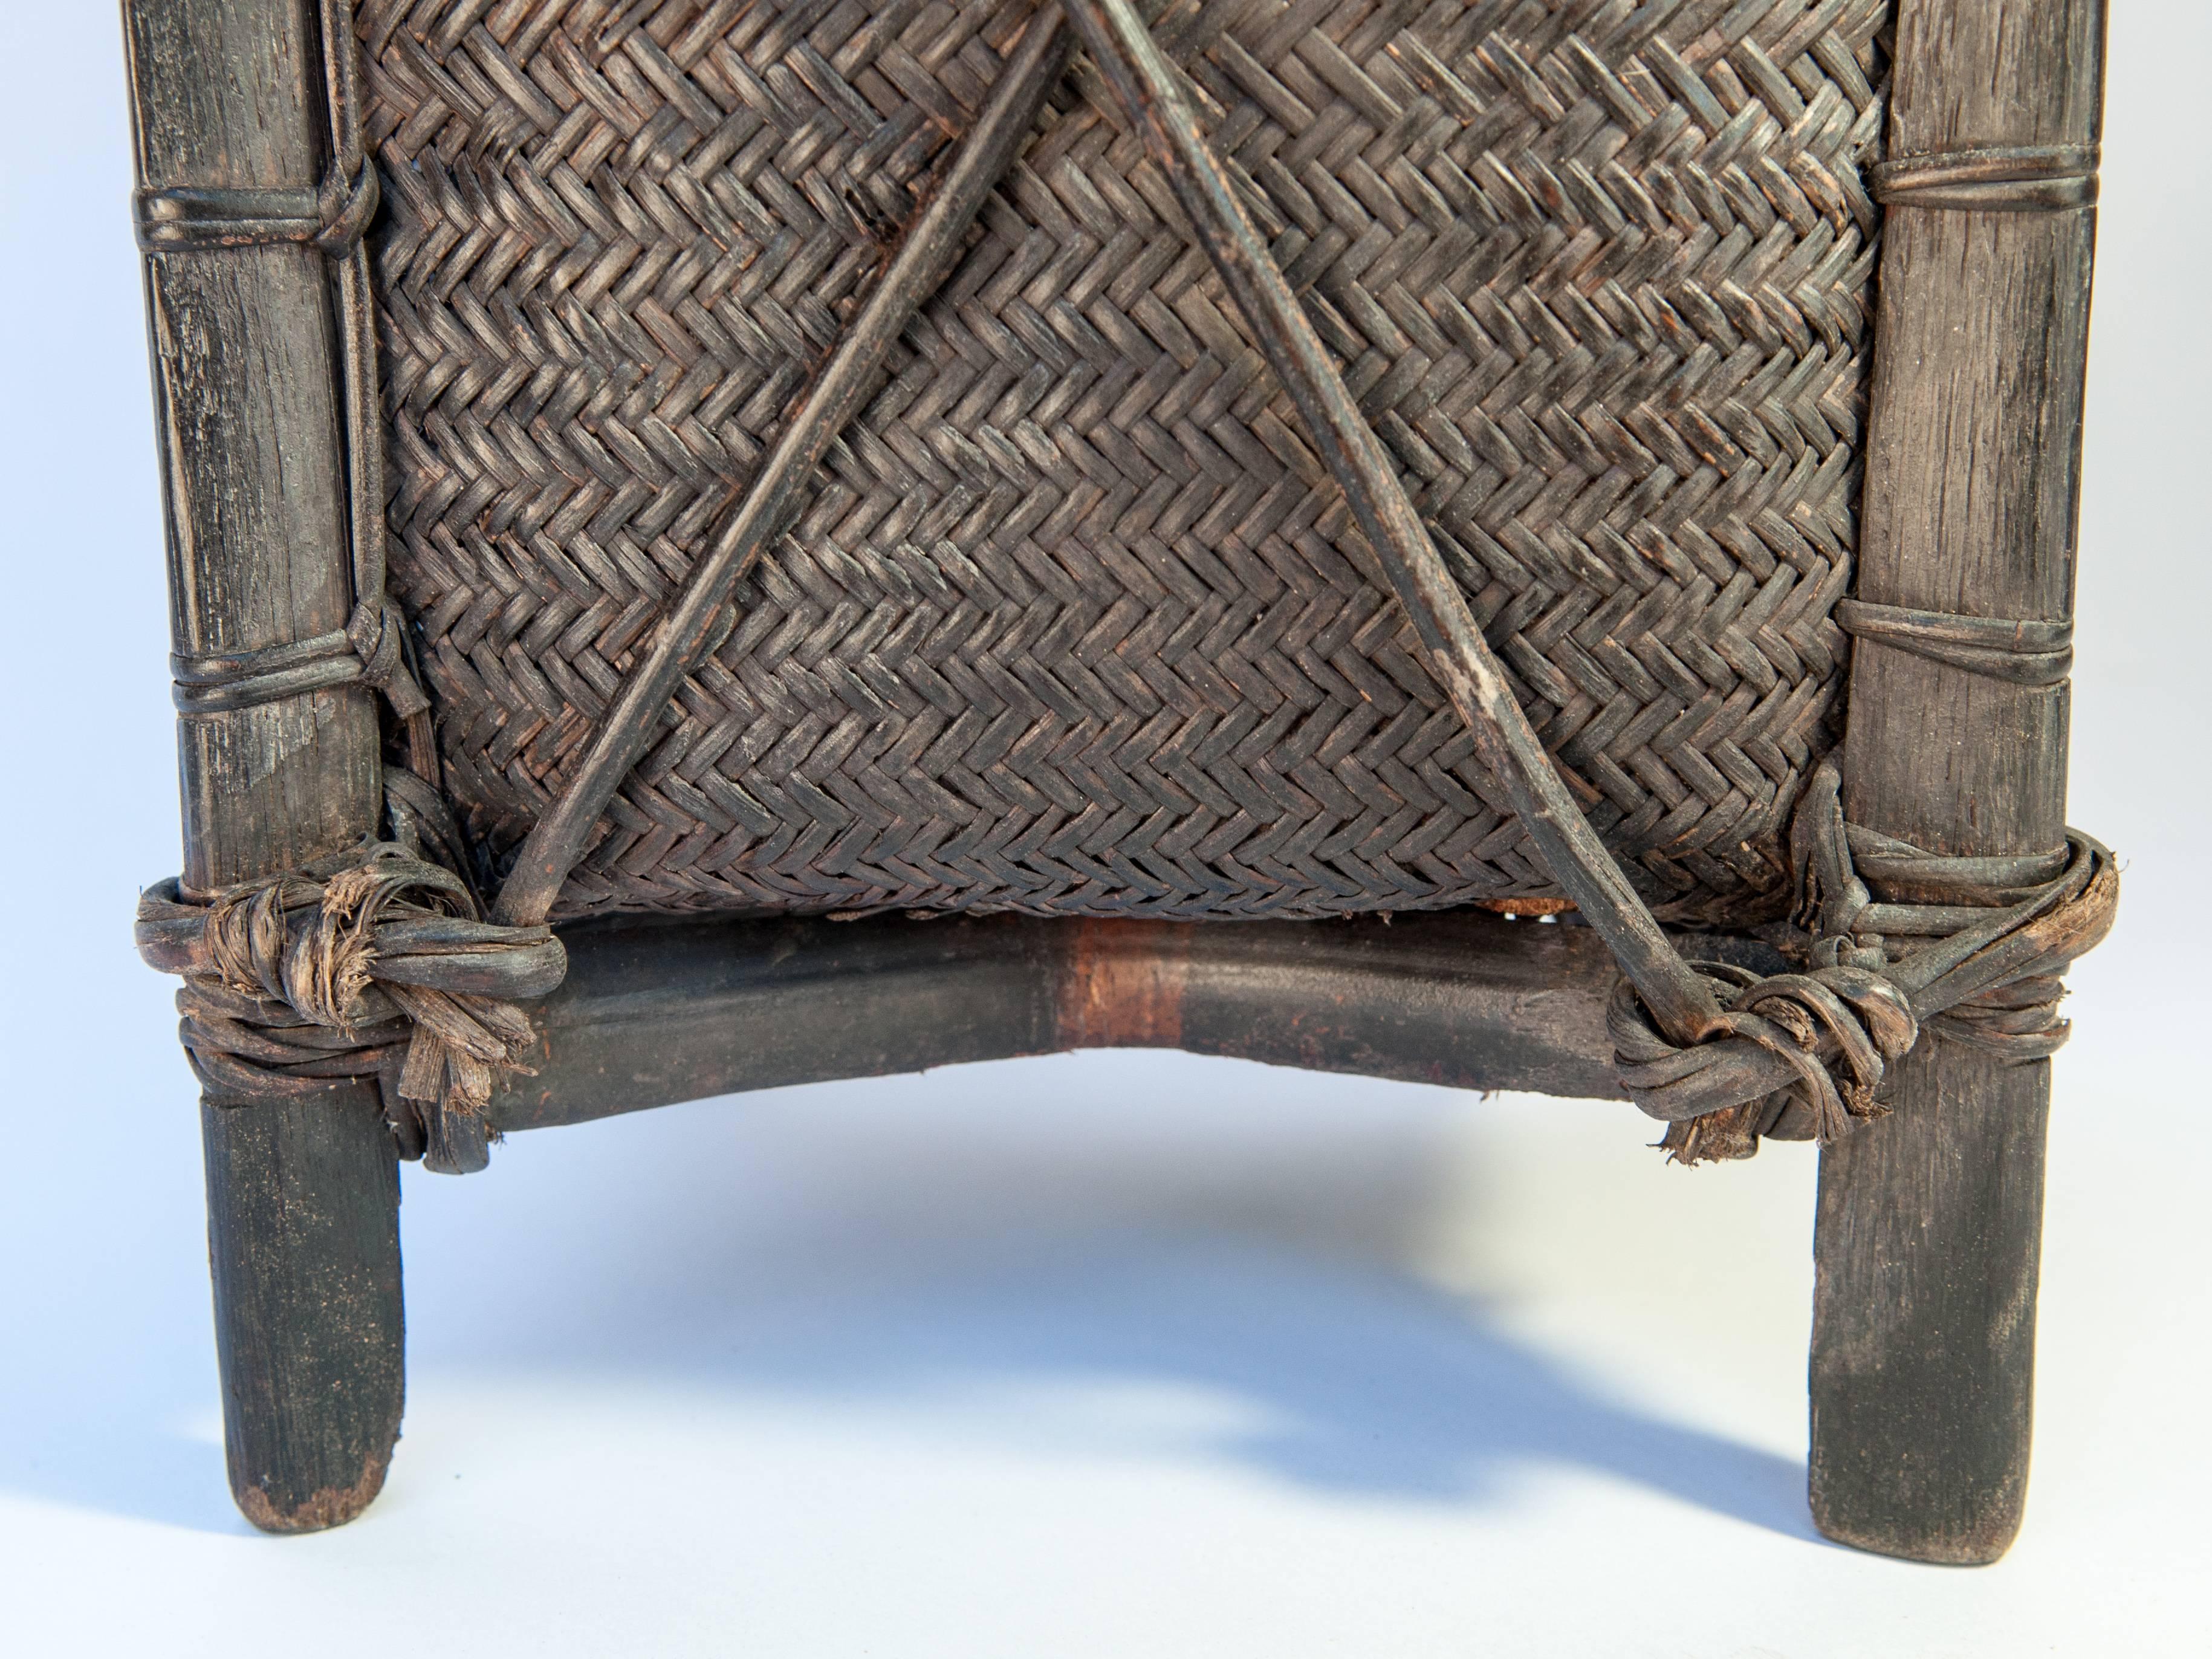 Tall Tribal Grain Storage Basket from Borneo, Mid-Late 20th Century 1